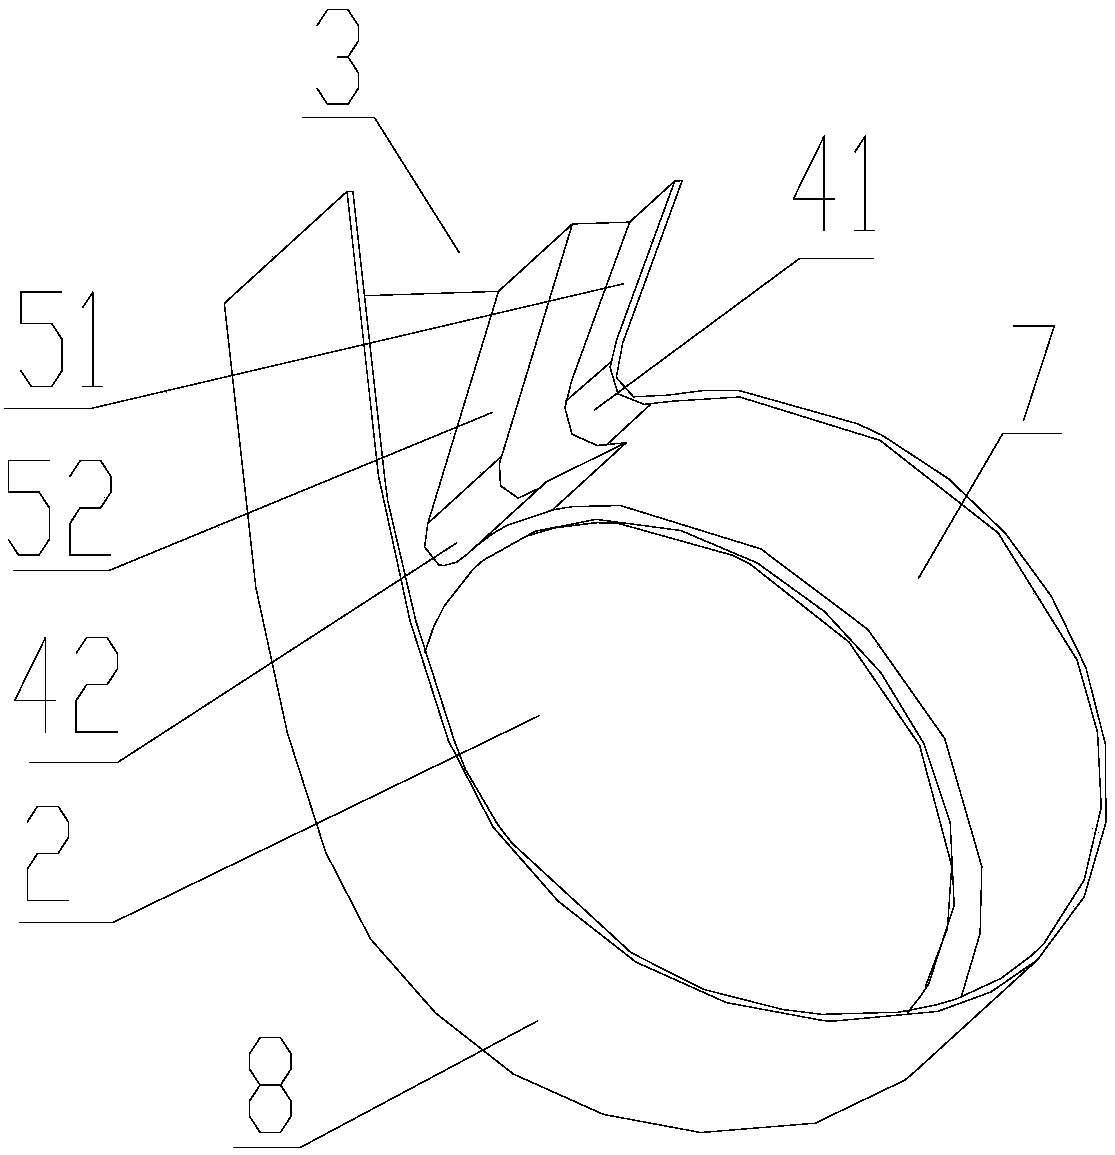 Stepped volute structure, centrifugal fan and air blowing device